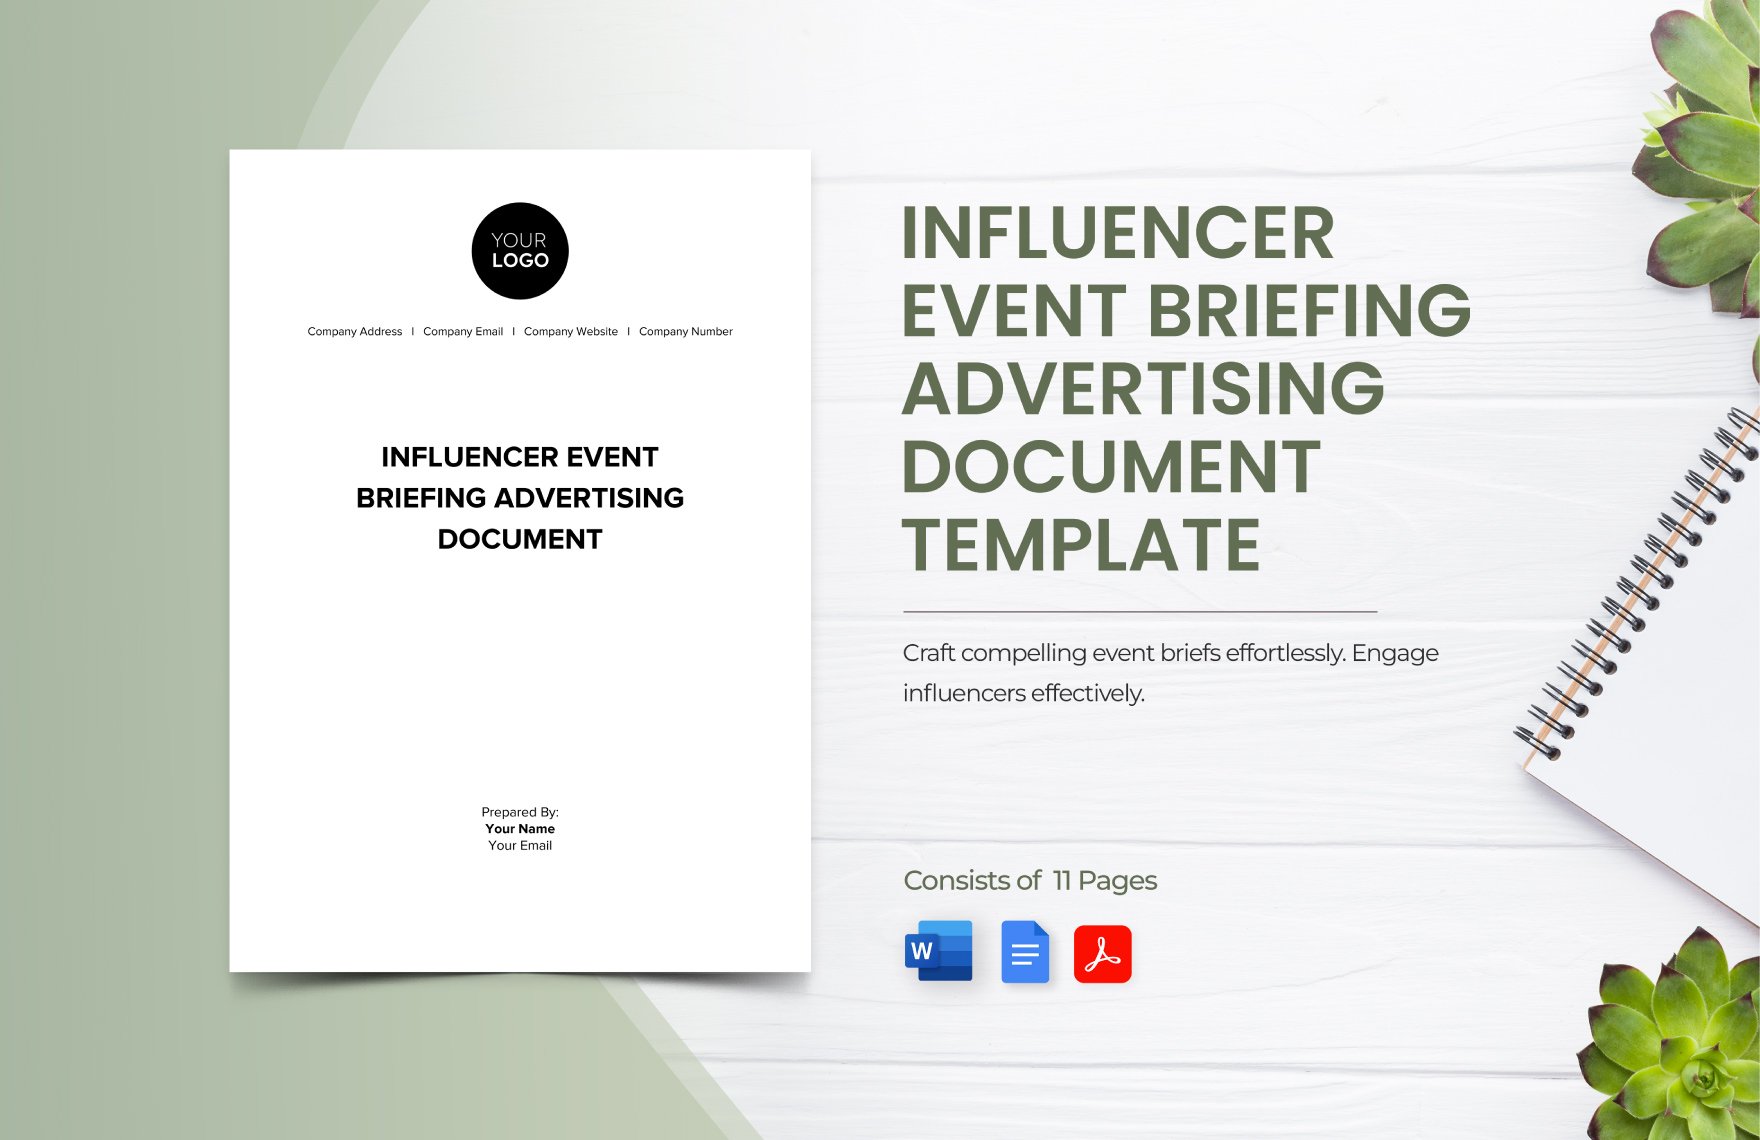 Influencer Event Briefing Advertising Document Template in Word, Google Docs, PDF